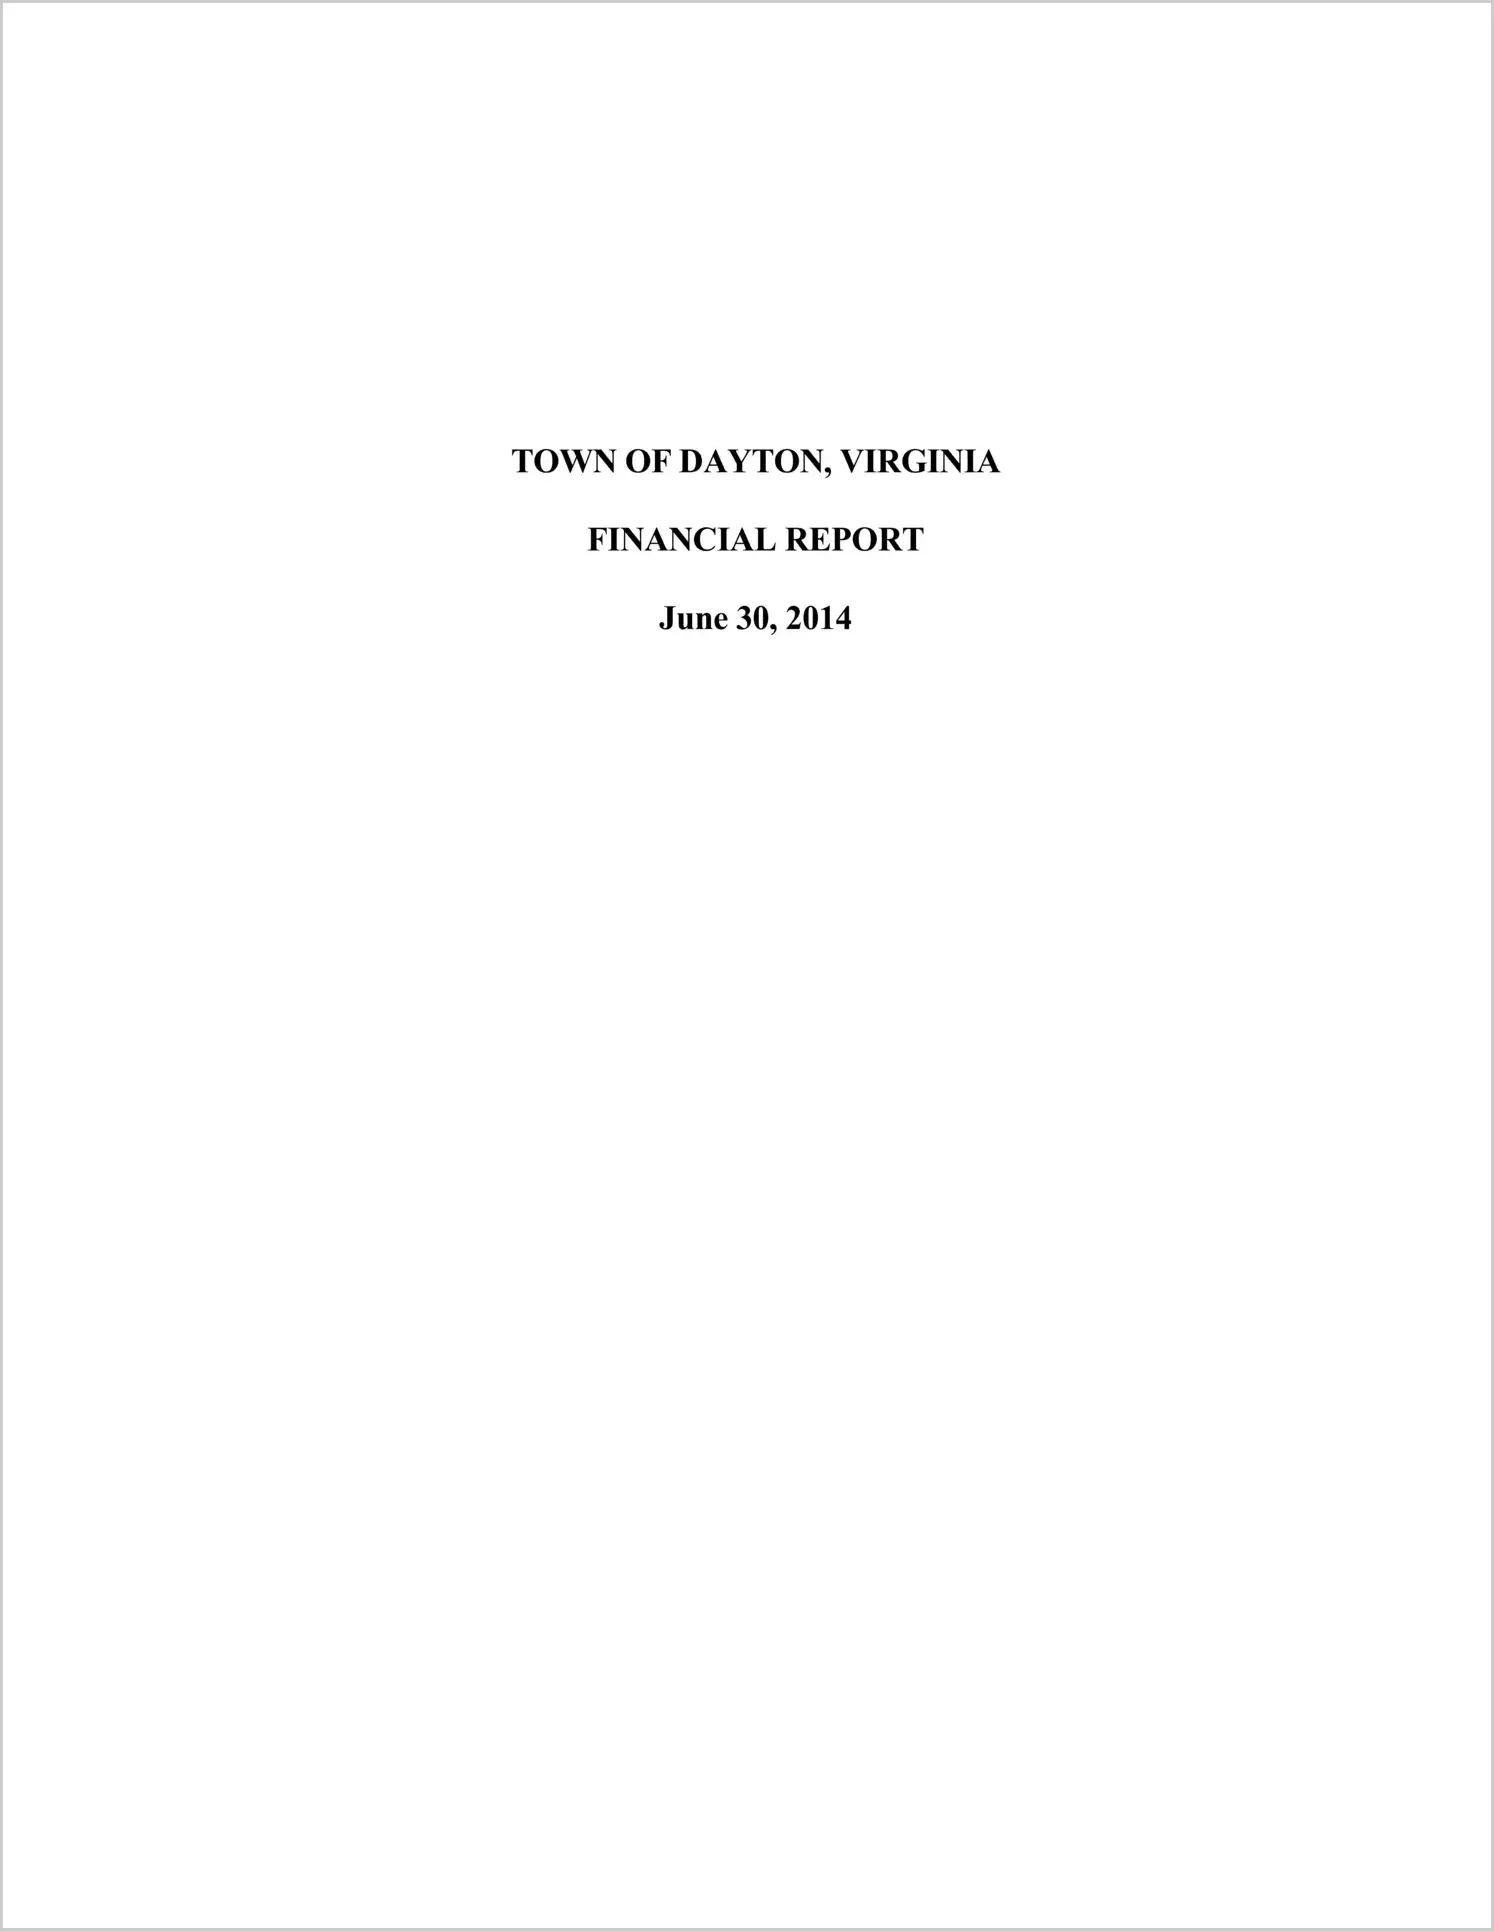 2014 Annual Financial Report for Town of Dayton